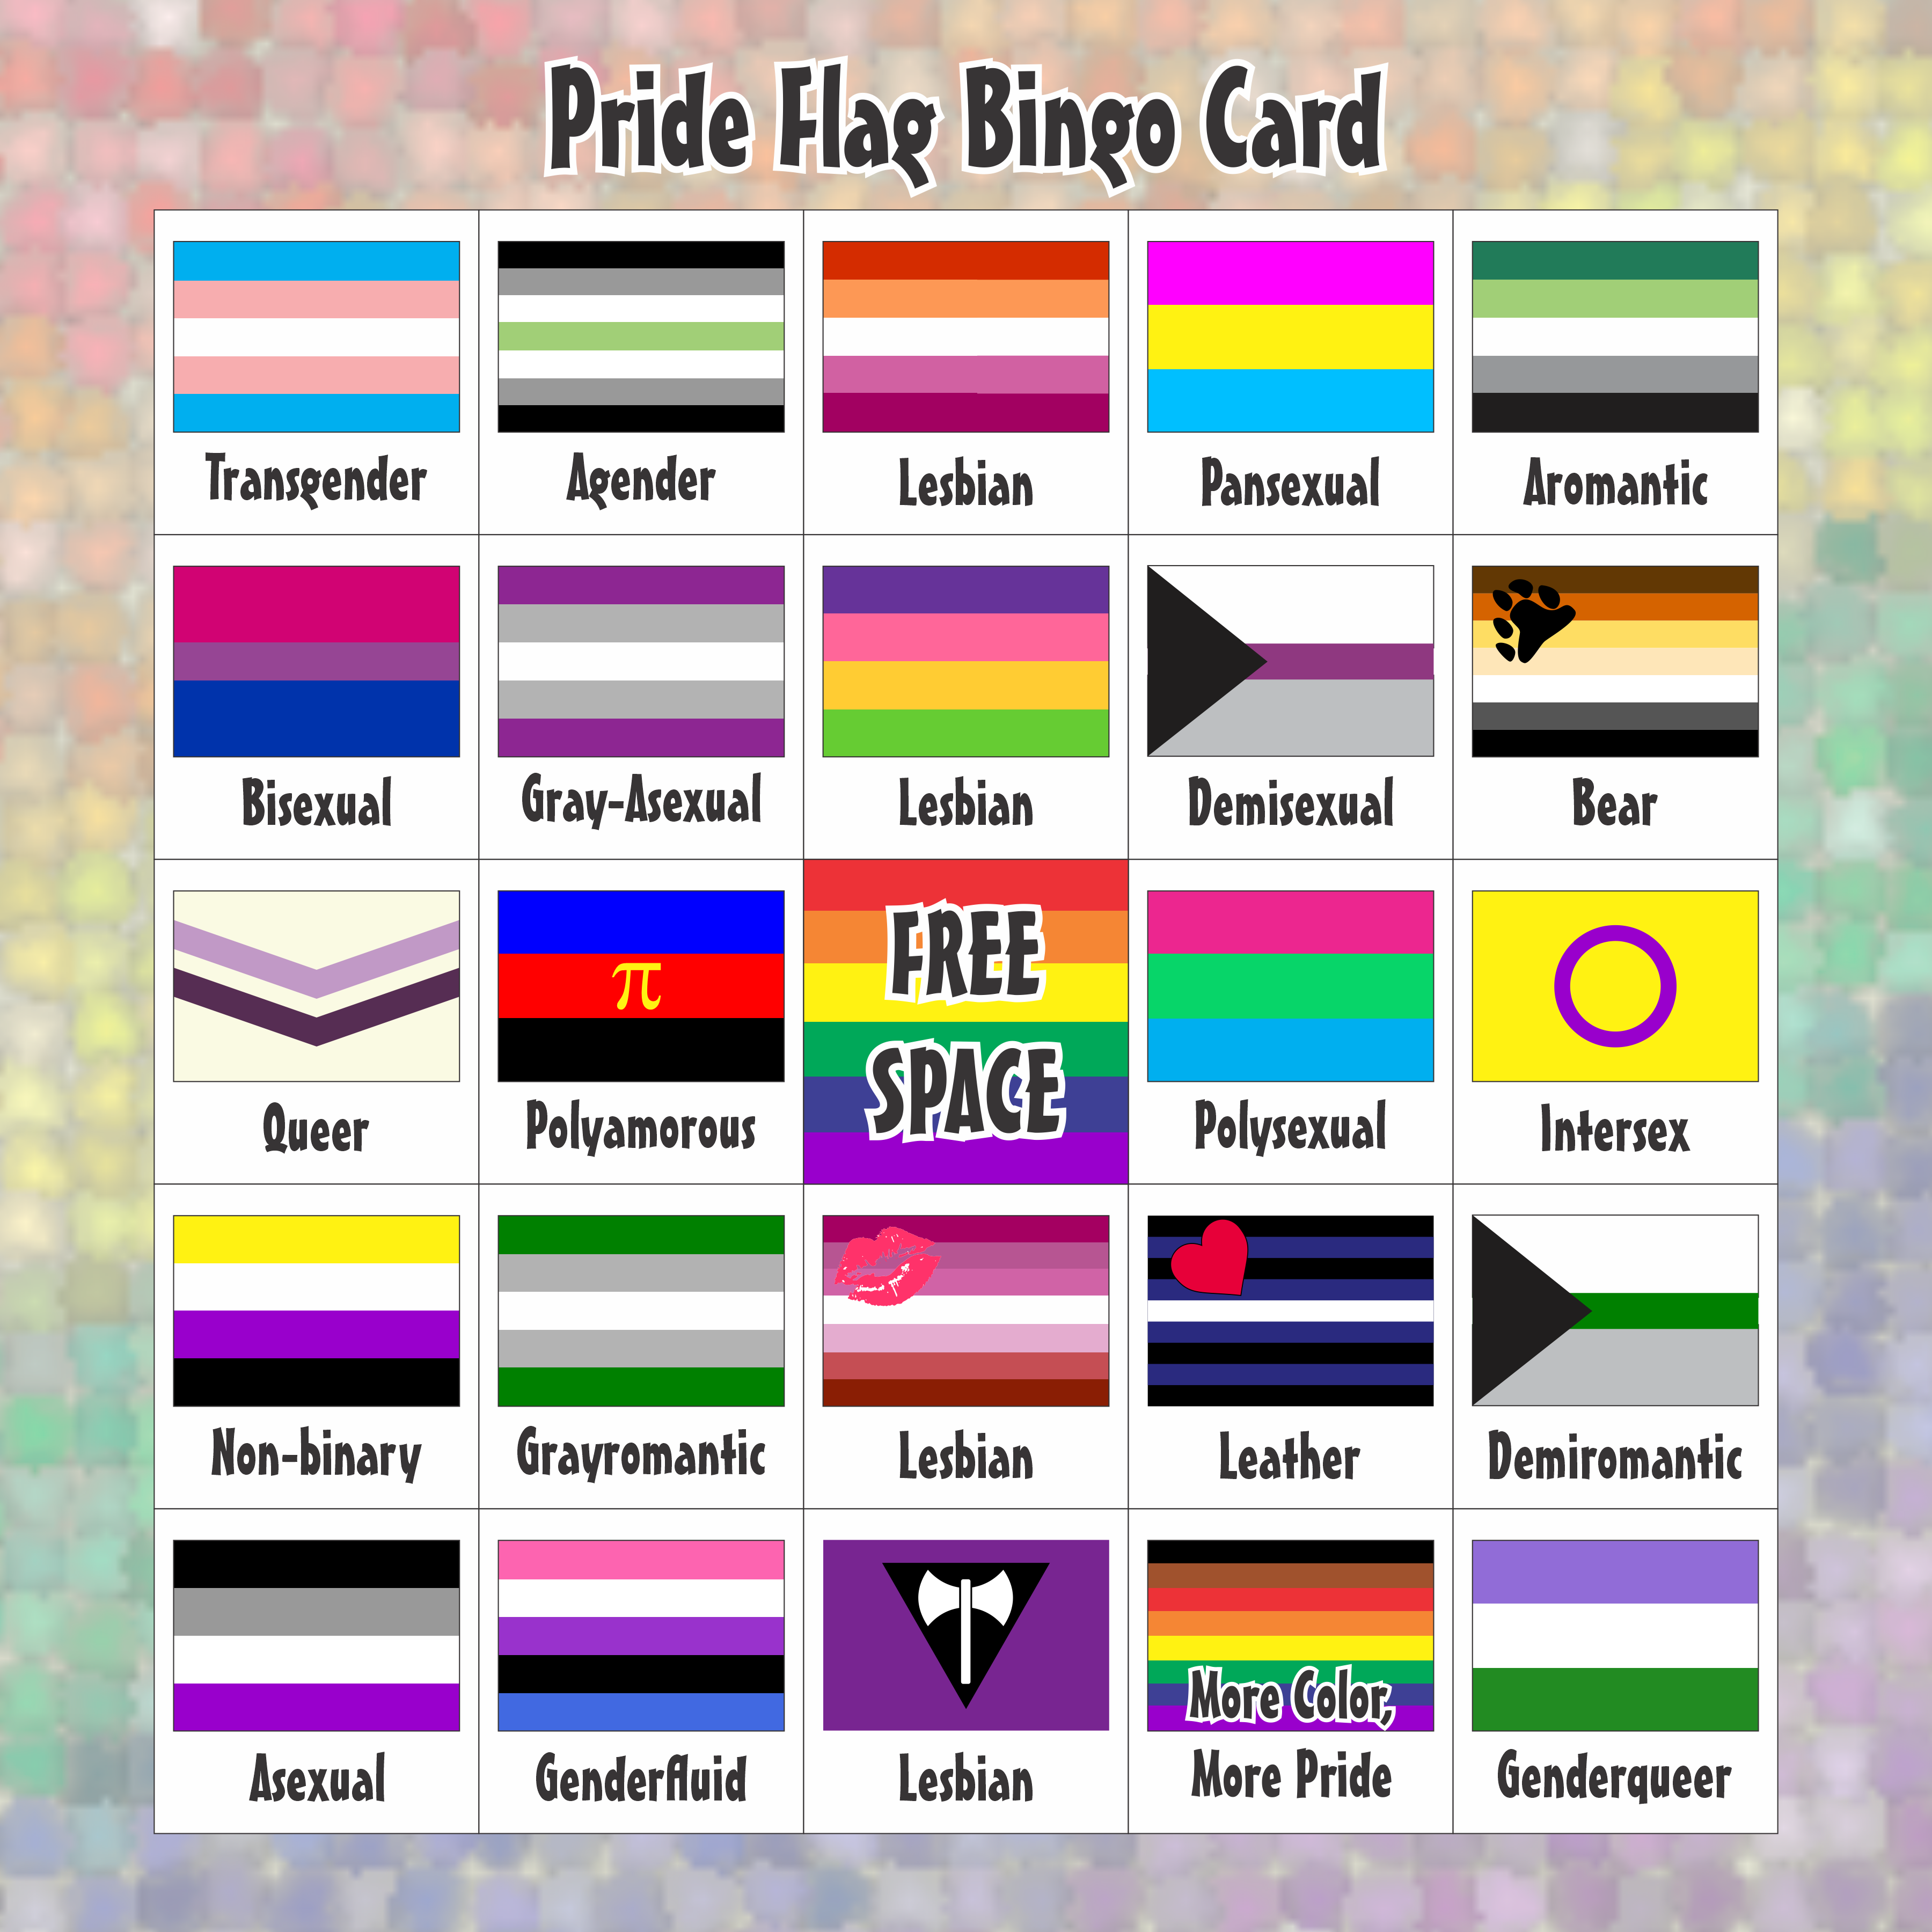 what does all the colors mean on the gay pride flag